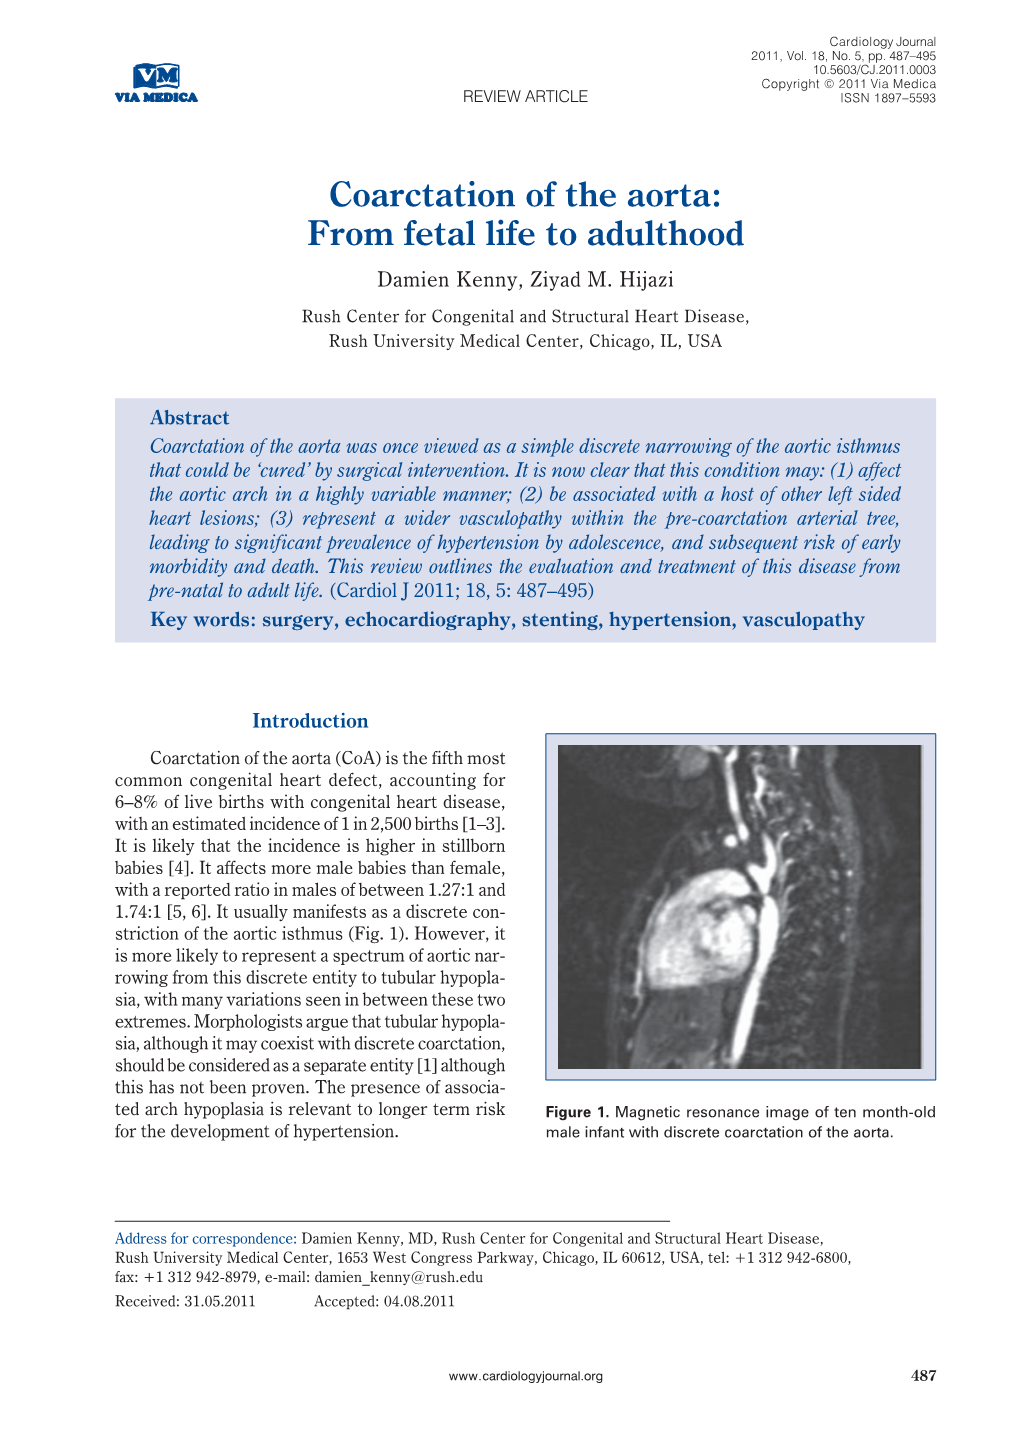 Coarctation of the Aorta: from Fetal Life to Adulthood